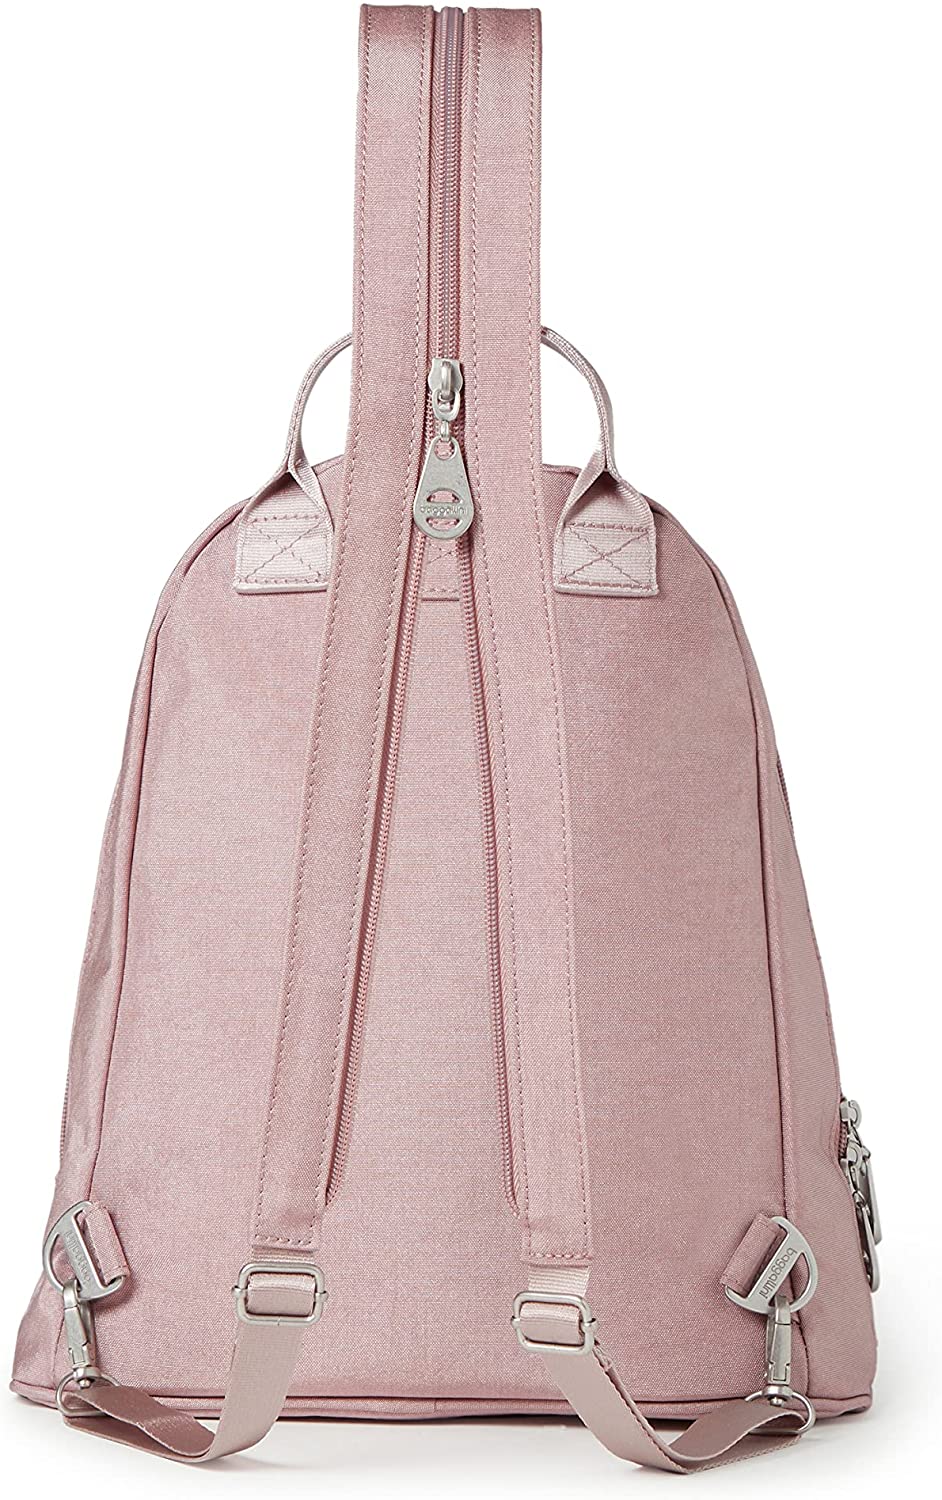 Guess, Bags, Guess Pink Velvet Mini Backpack Purse